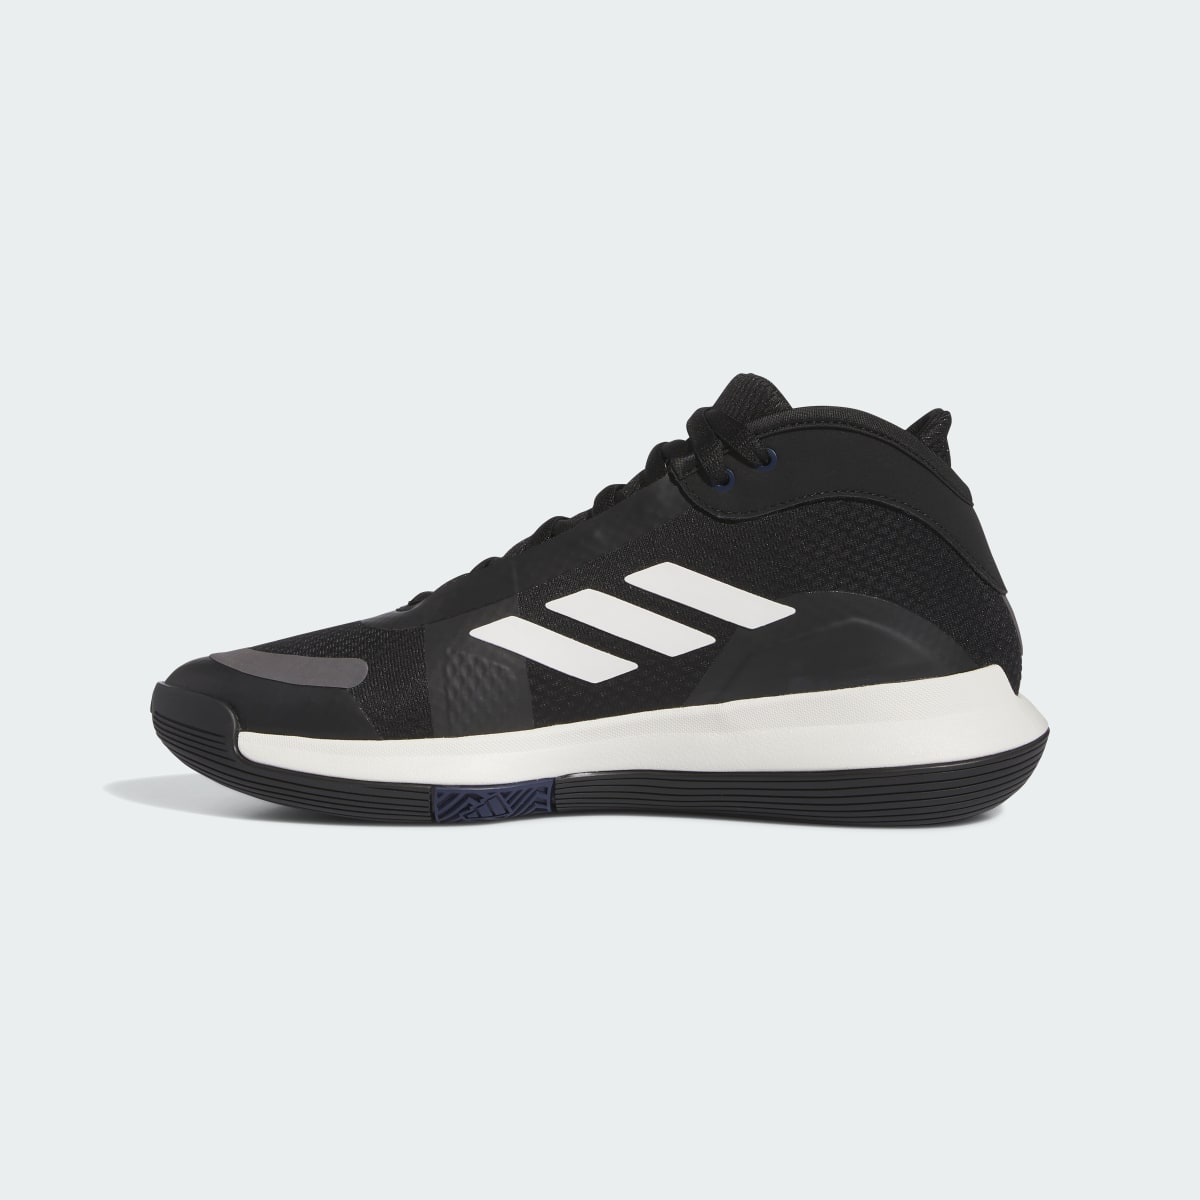 Adidas Bounce Legends Low Basketball Shoes. 10